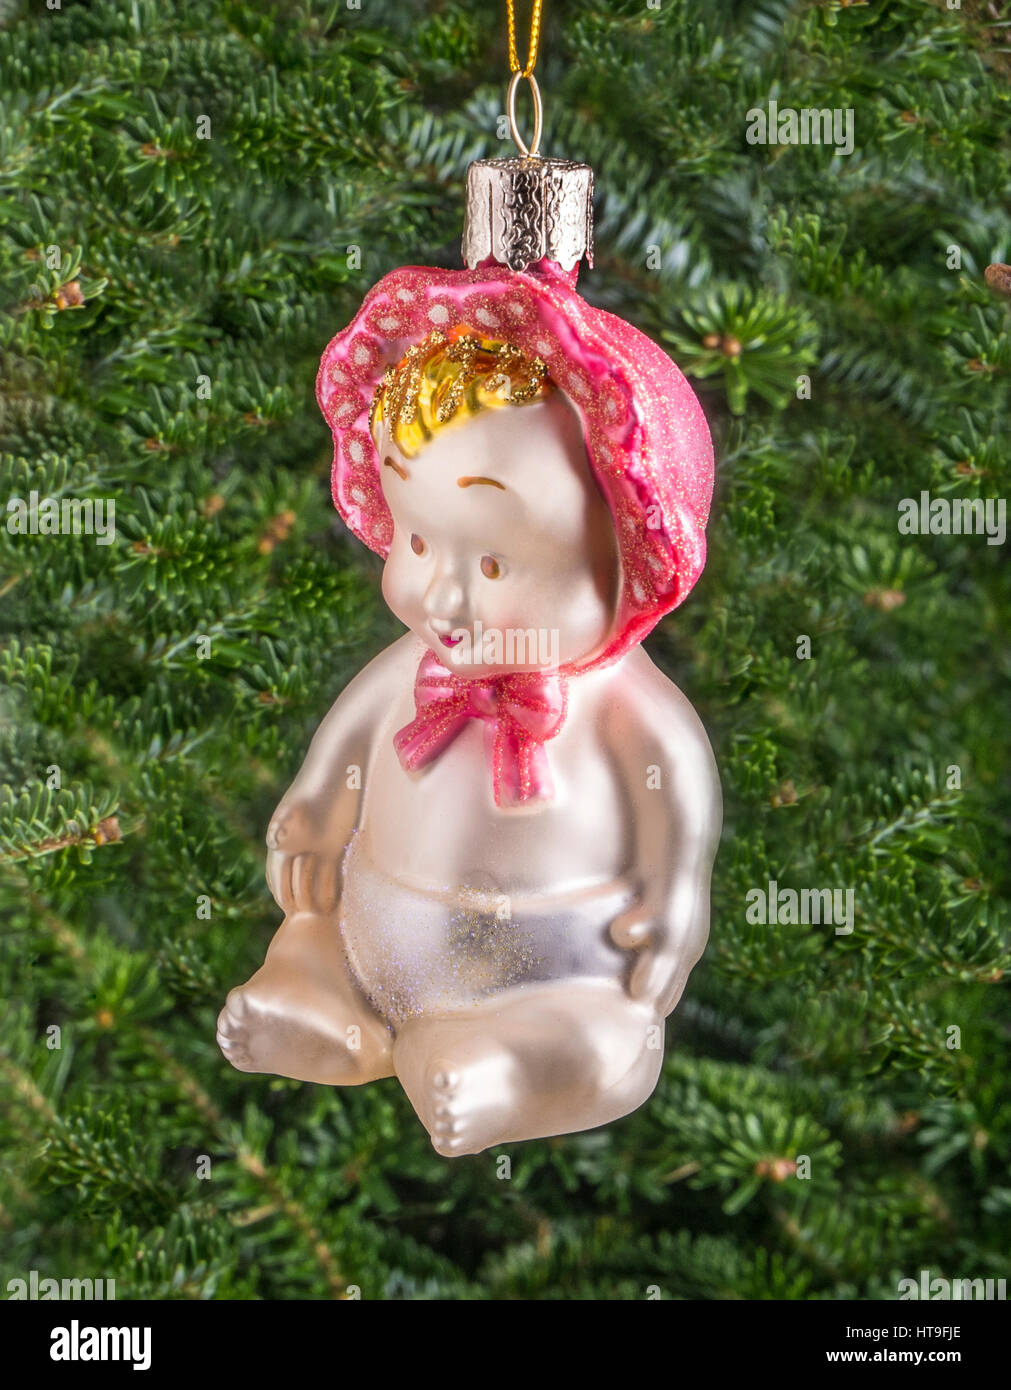 Christmas bauble hanging from a tree in the shape of a Cute Baby Stock Photo